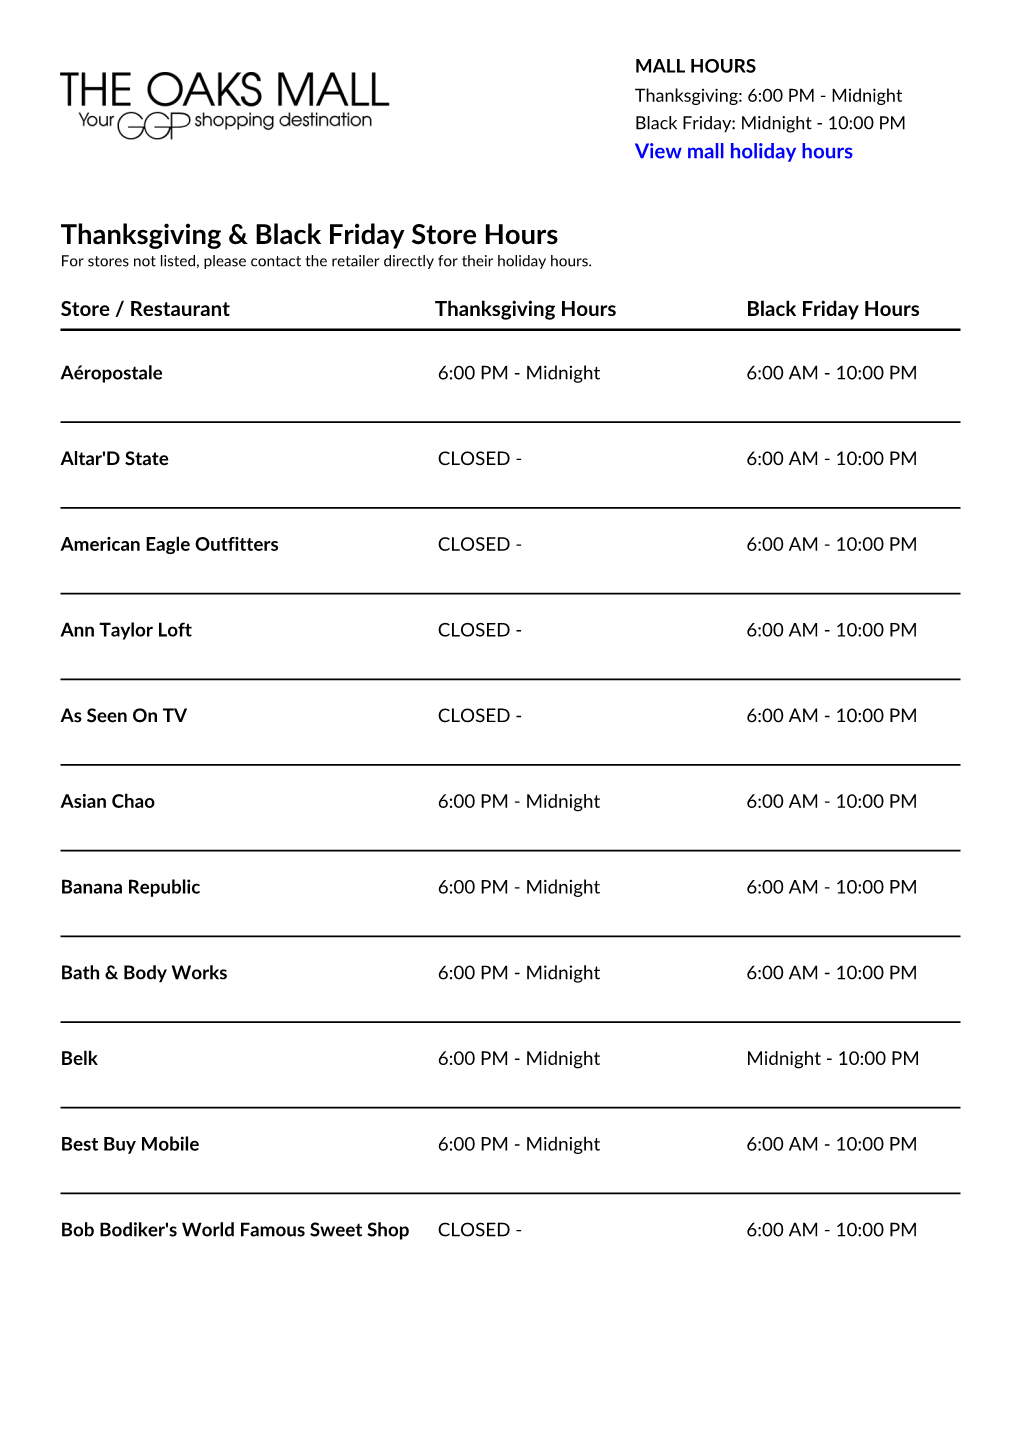 Thanksgiving & Black Friday Store Hours